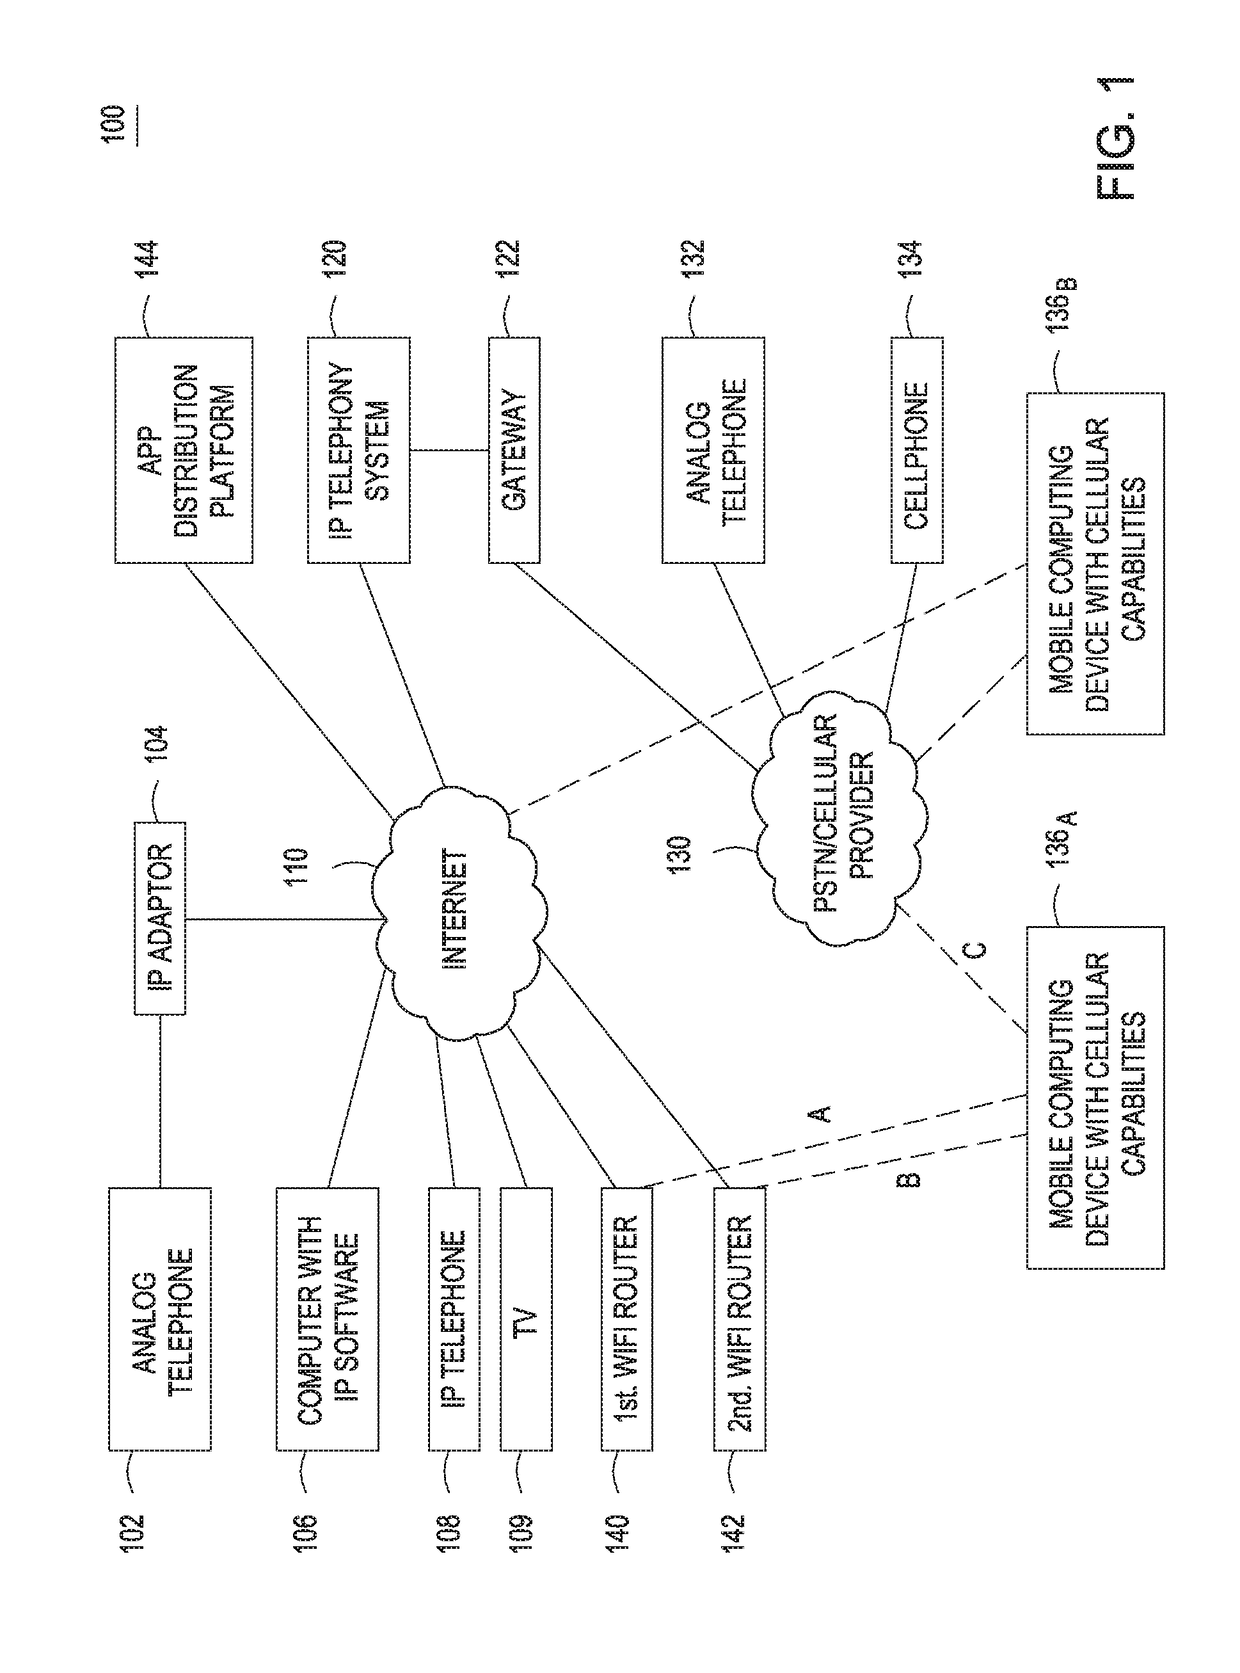 Systems and methods for providing integrated computerized personal assistant services in telephony communications